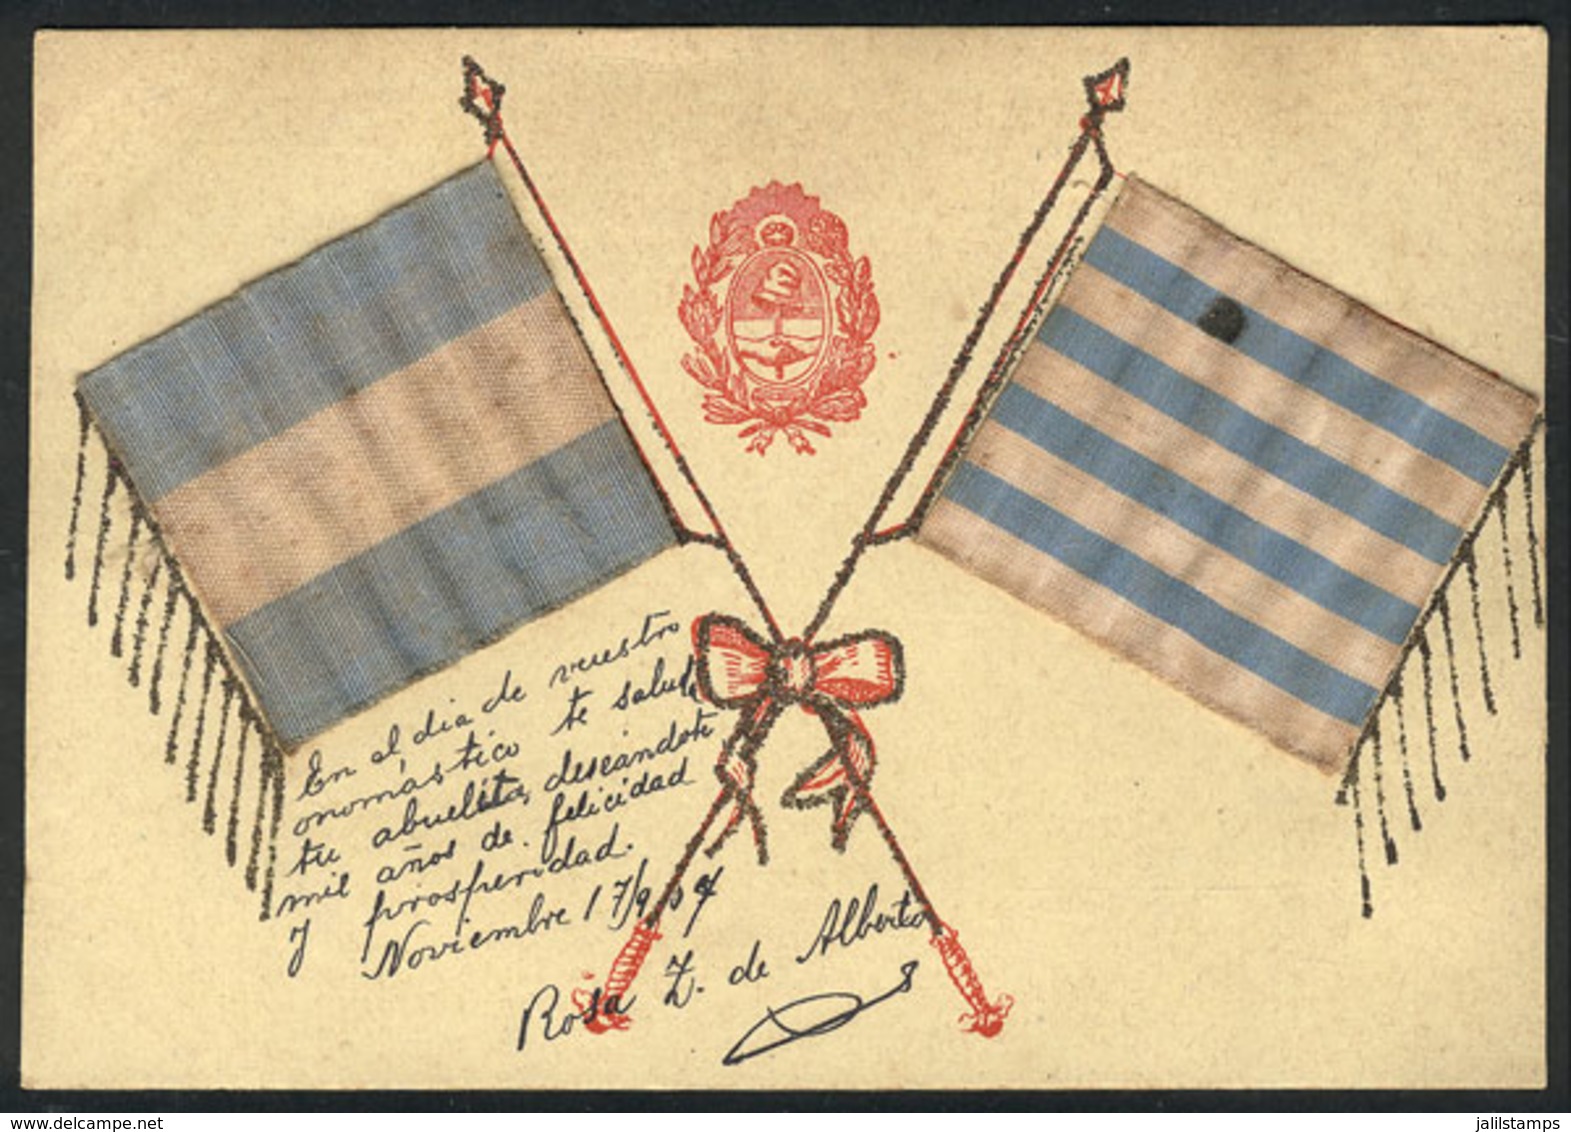 98 ARGENTINA: Flags Of Argentina And Uruguay Made Of Cloth, Used In 1907, VF Quality - Argentinien